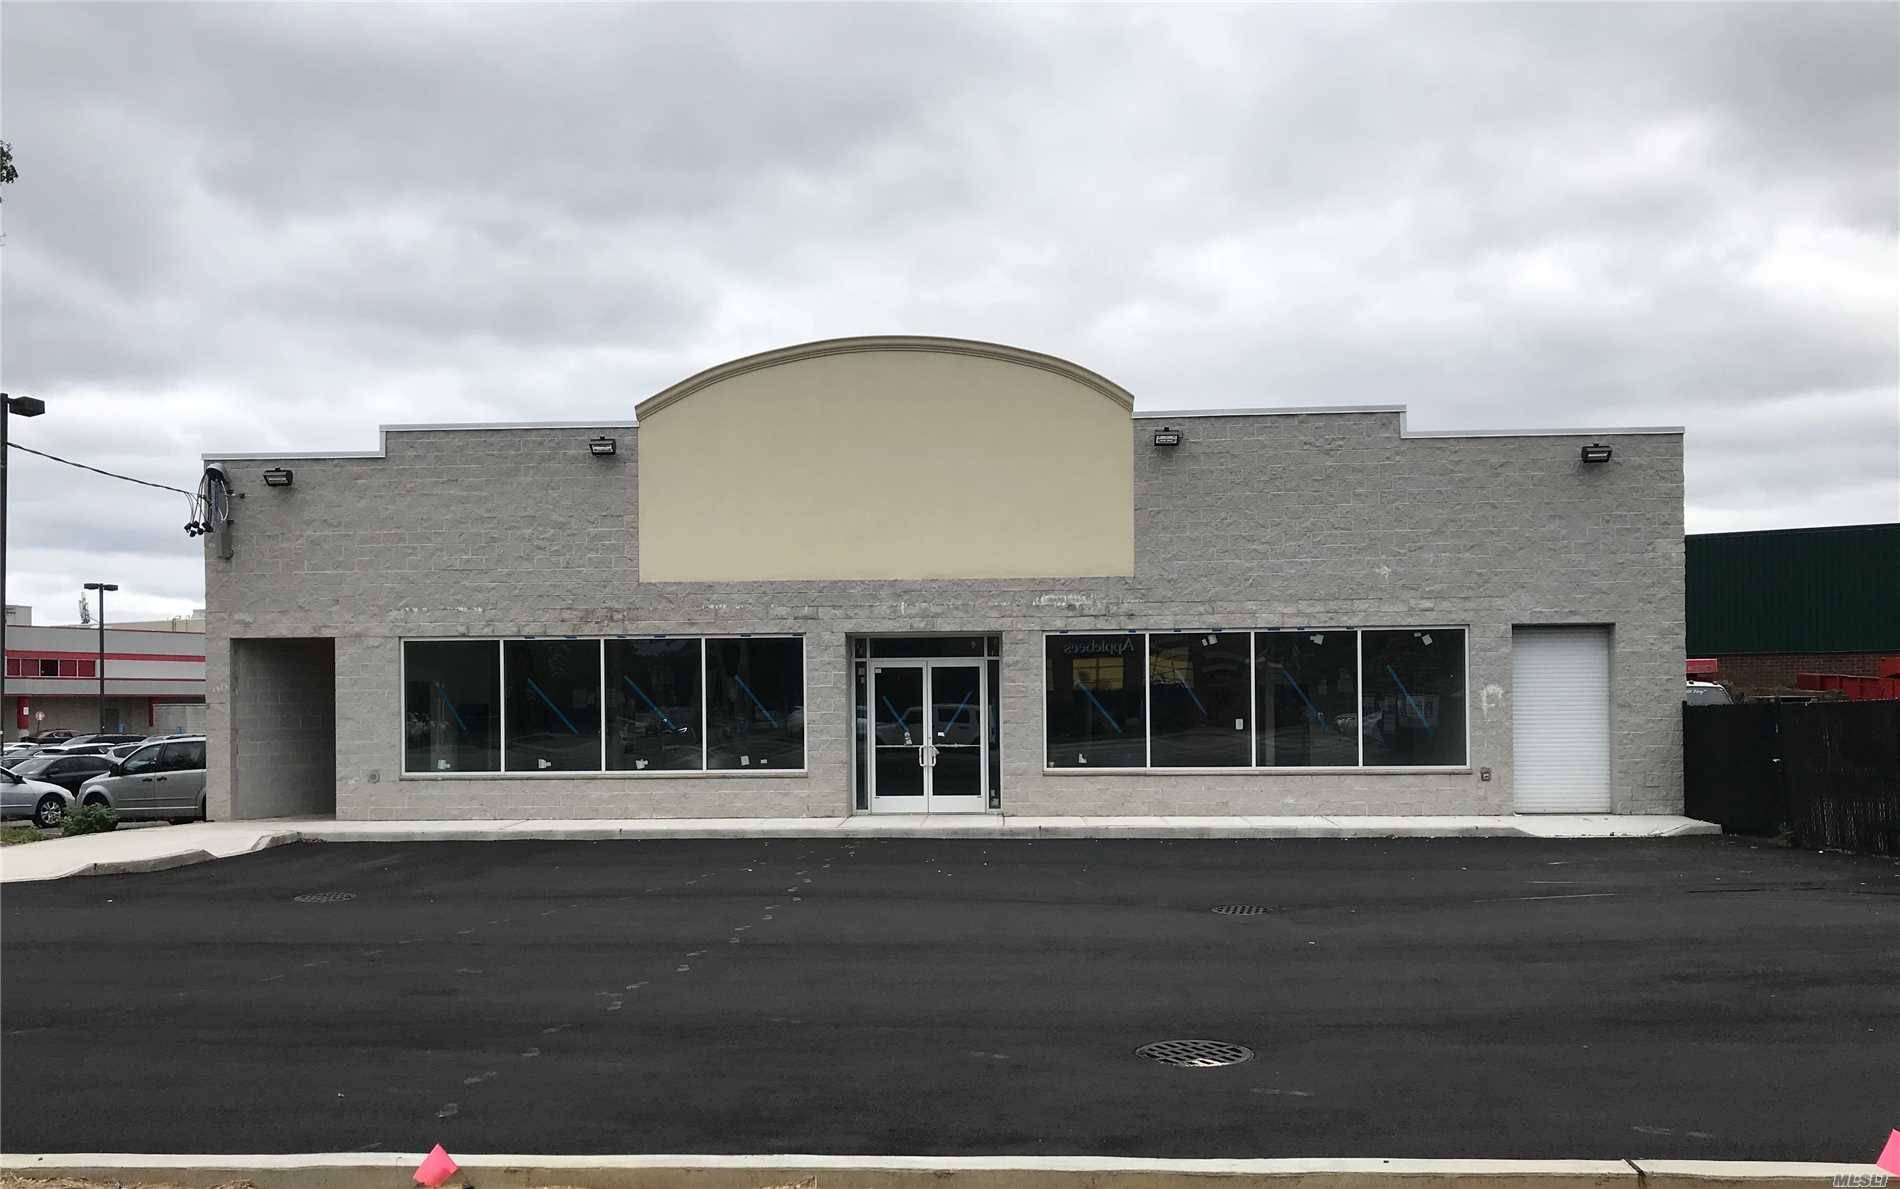 Brand New Retail Building 15 Foot Ceiling, With 3000 Sqft 2500 Sqft Basement, On The Busy Street And Corner Lot, 15 Parking Spaces With Loading Dock.